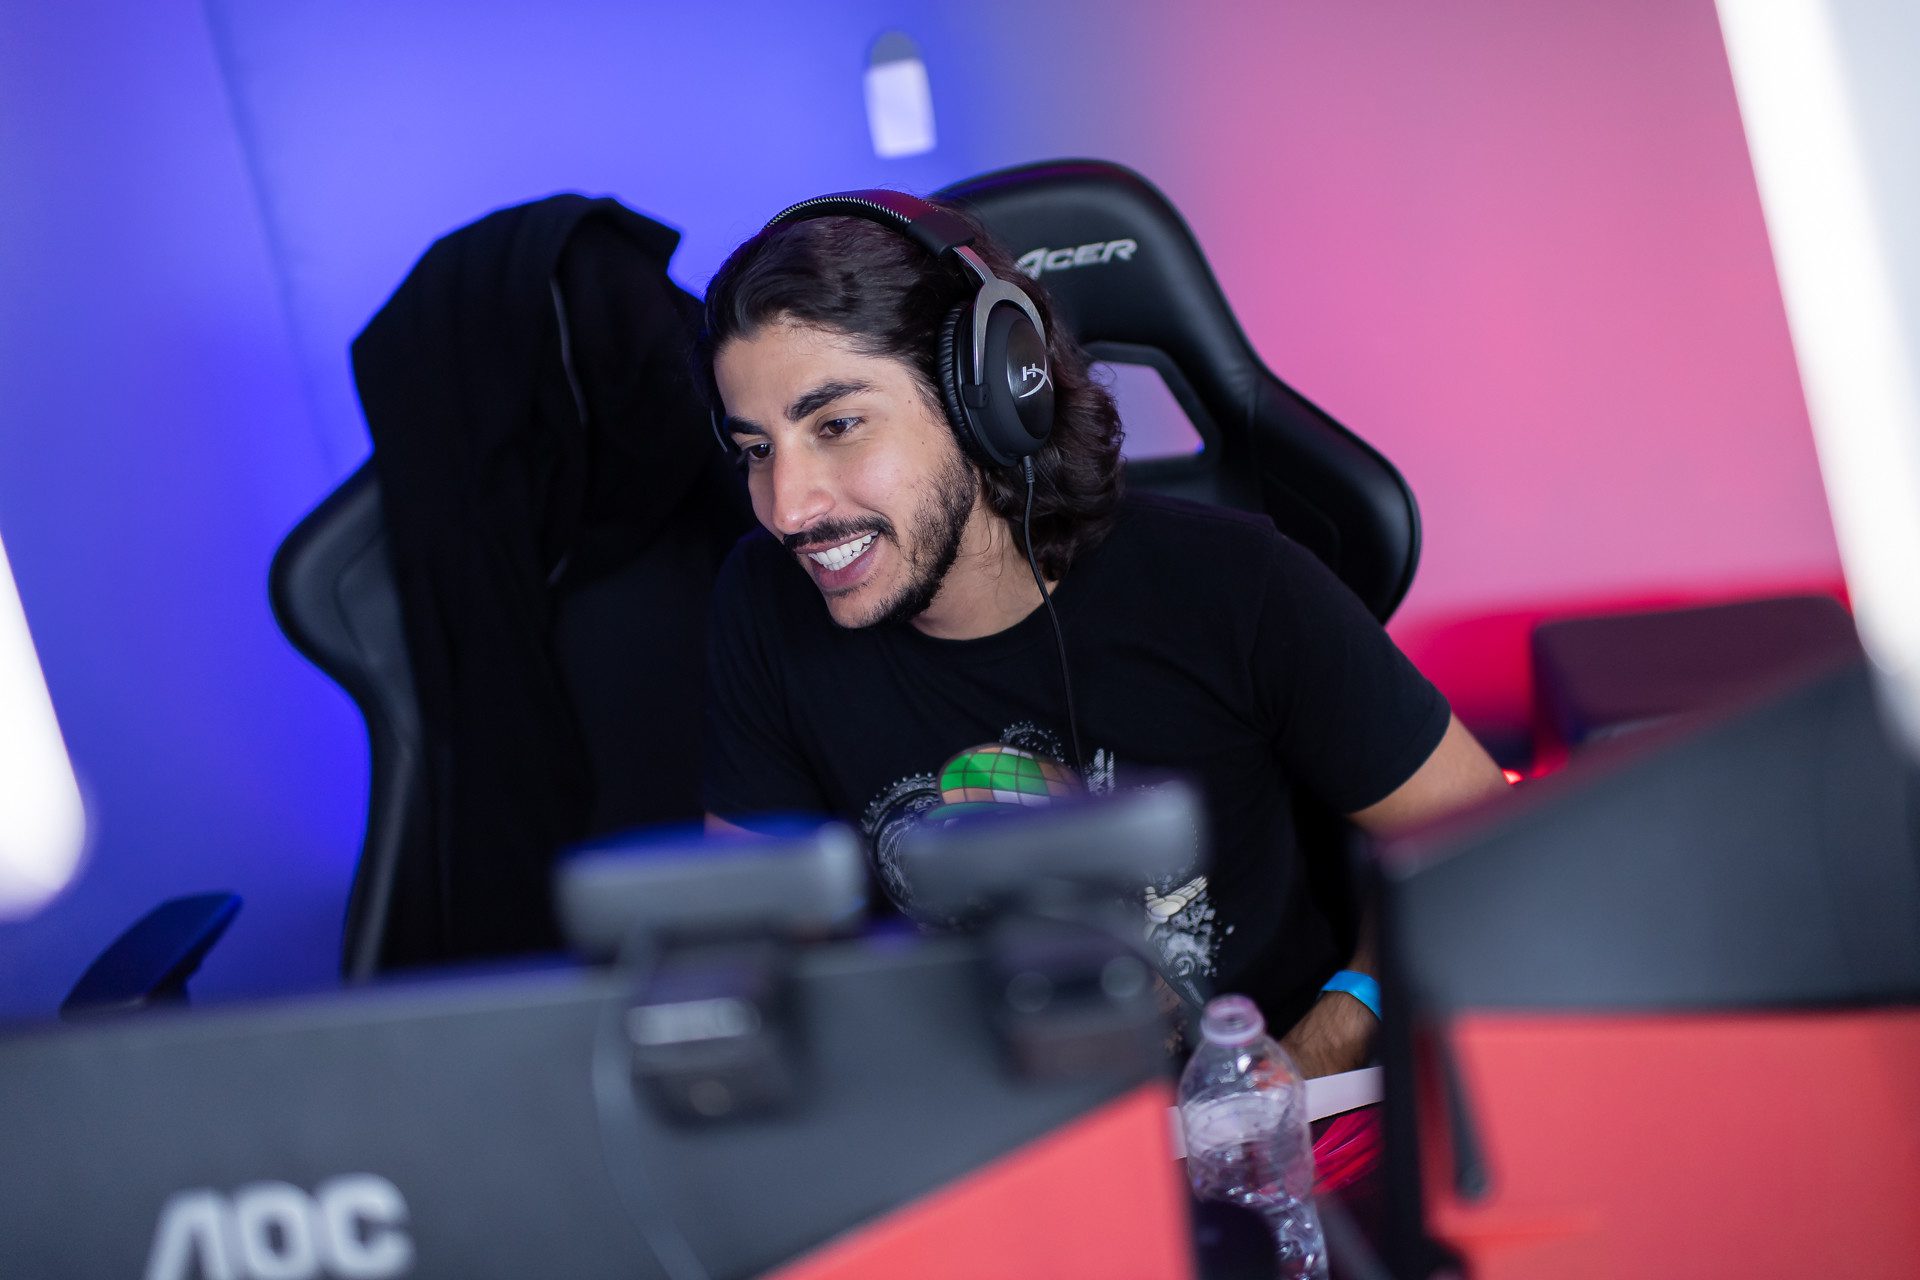 Twitch streamer Baiano is transforming Brazil's League of Legends